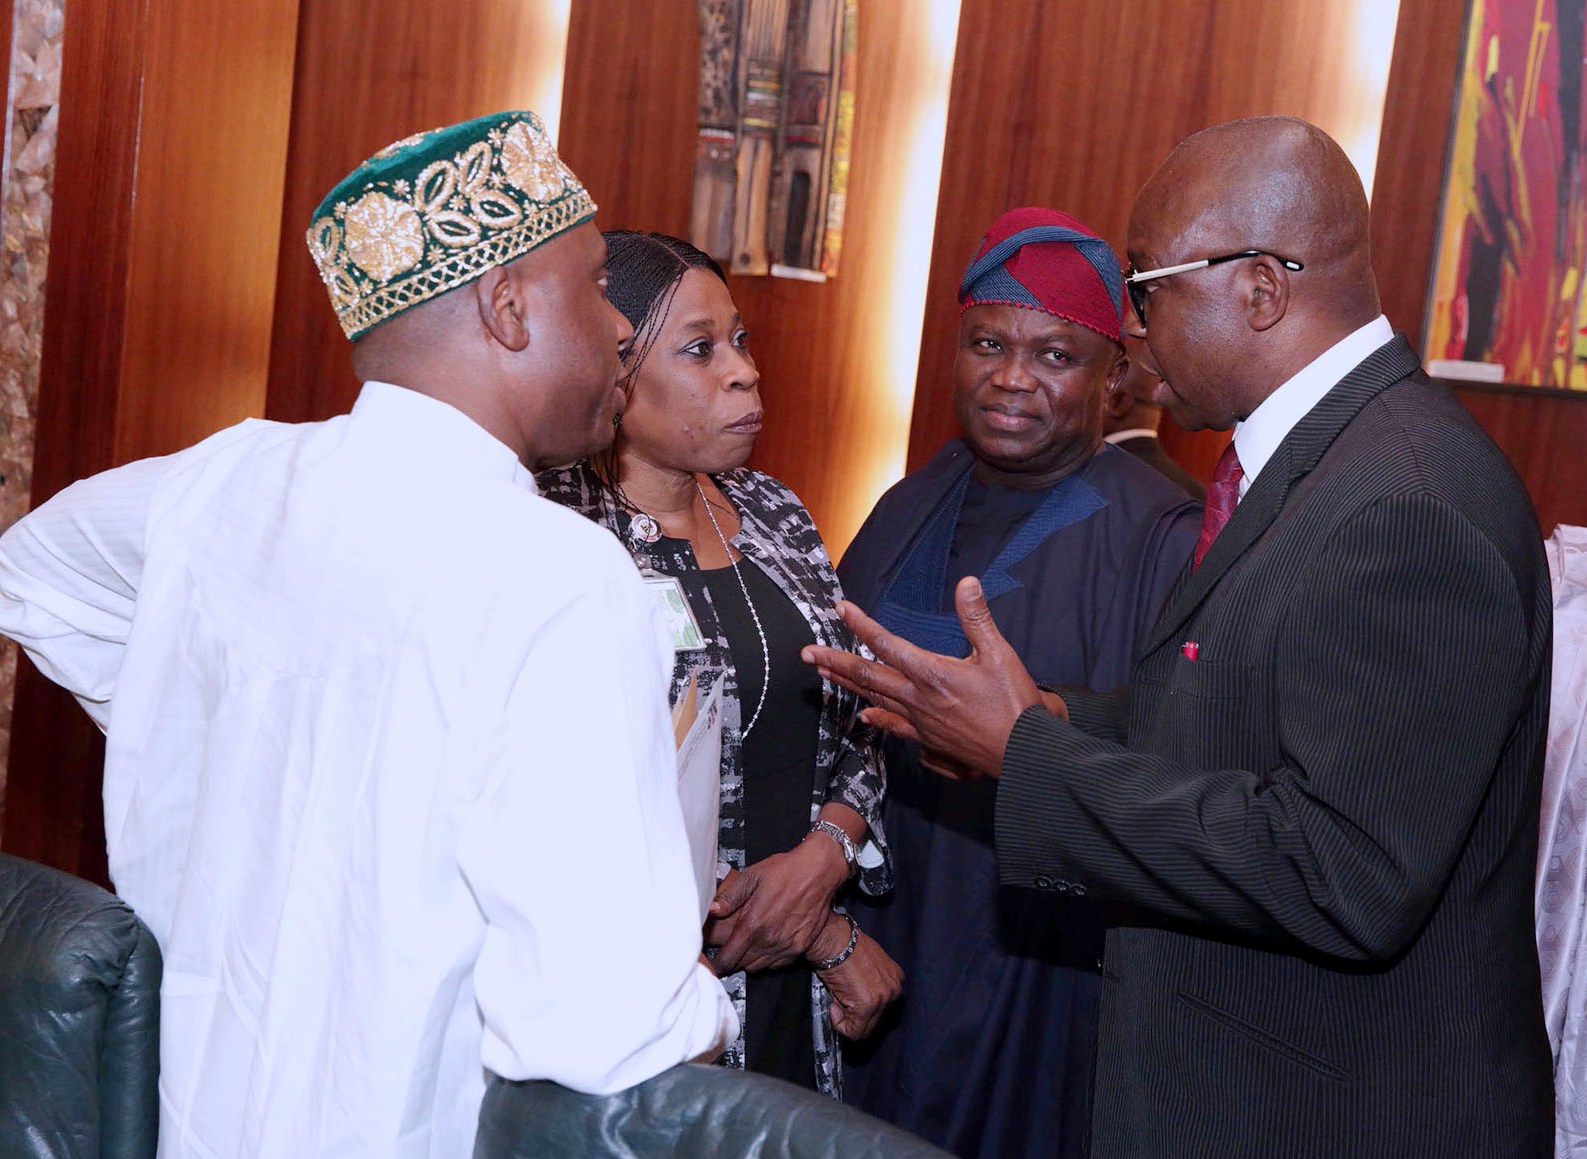 Lagos State Governor, Mr. Akinwunmi Ambode (2nd right); his Ekiti State counterpart, Governor Peter Ayo Fayose (right); Minister of Transportation, Mr Rotimi Amaechi (left) during the National Economic Council meeting at the Council Chamber, State House, Abuja, on Thursday, February 16, 2017